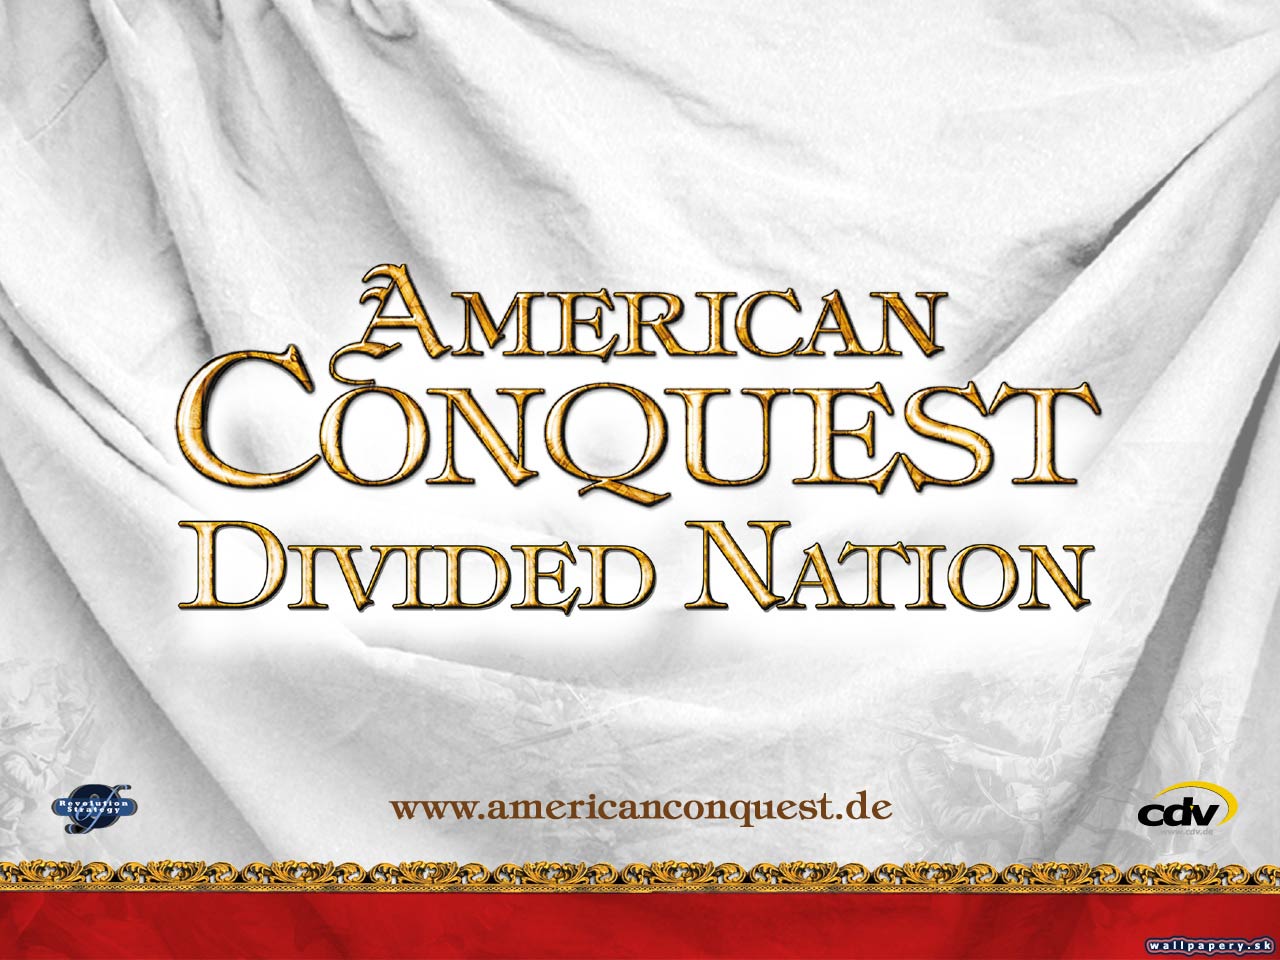 American Conquest: Divided Nation - wallpaper 3